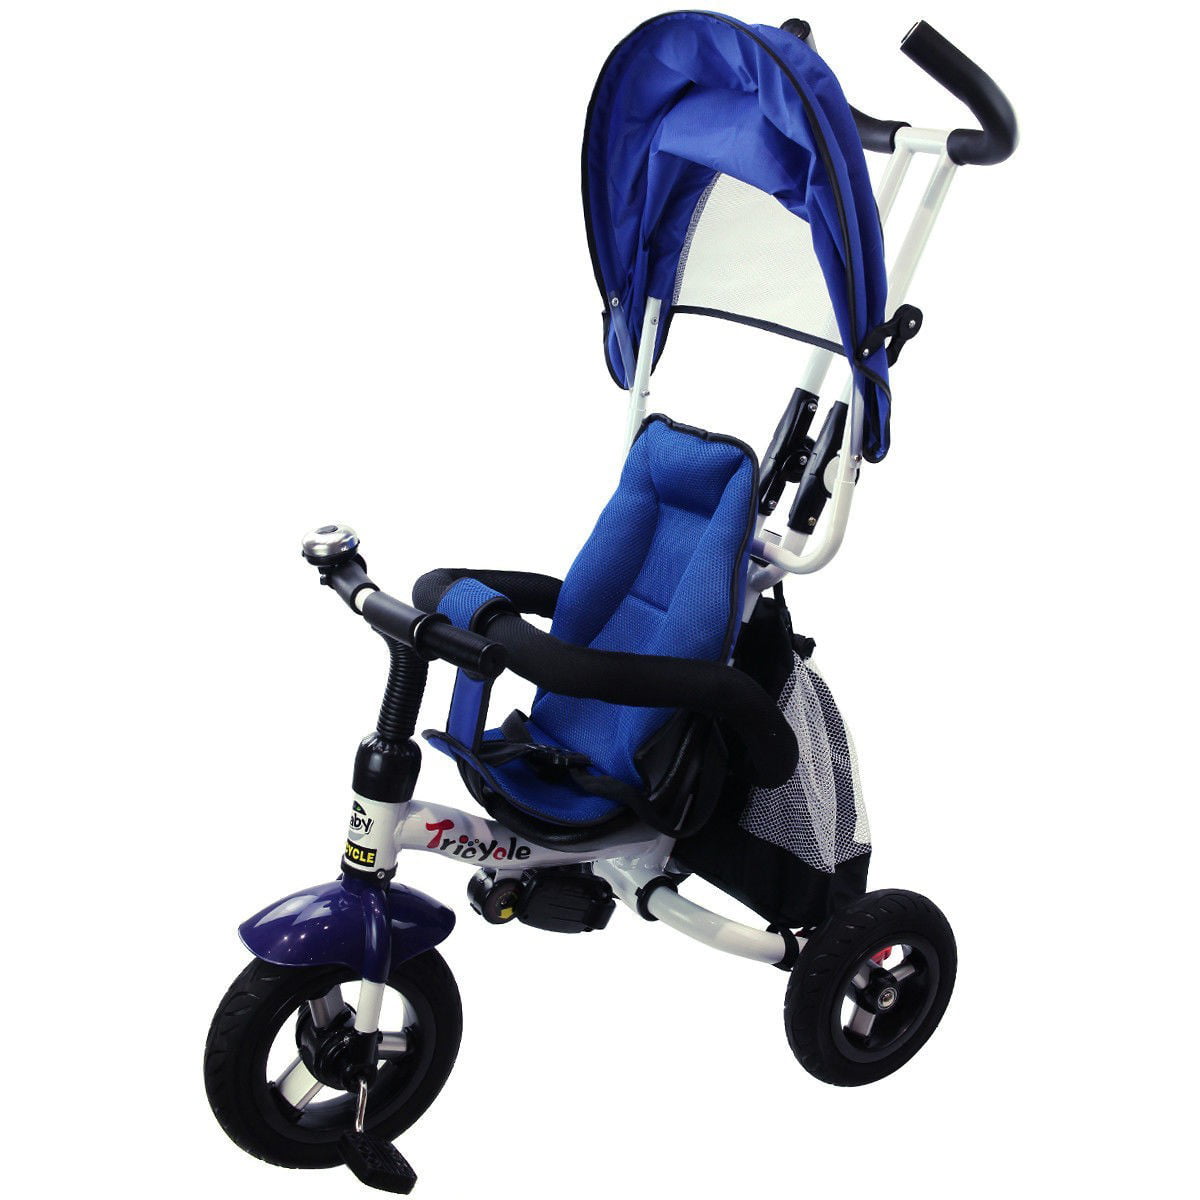 4-In-1 Kids Baby Stroller Tricycle Detachable Learning Toy Bike w/ Canopy Bag 